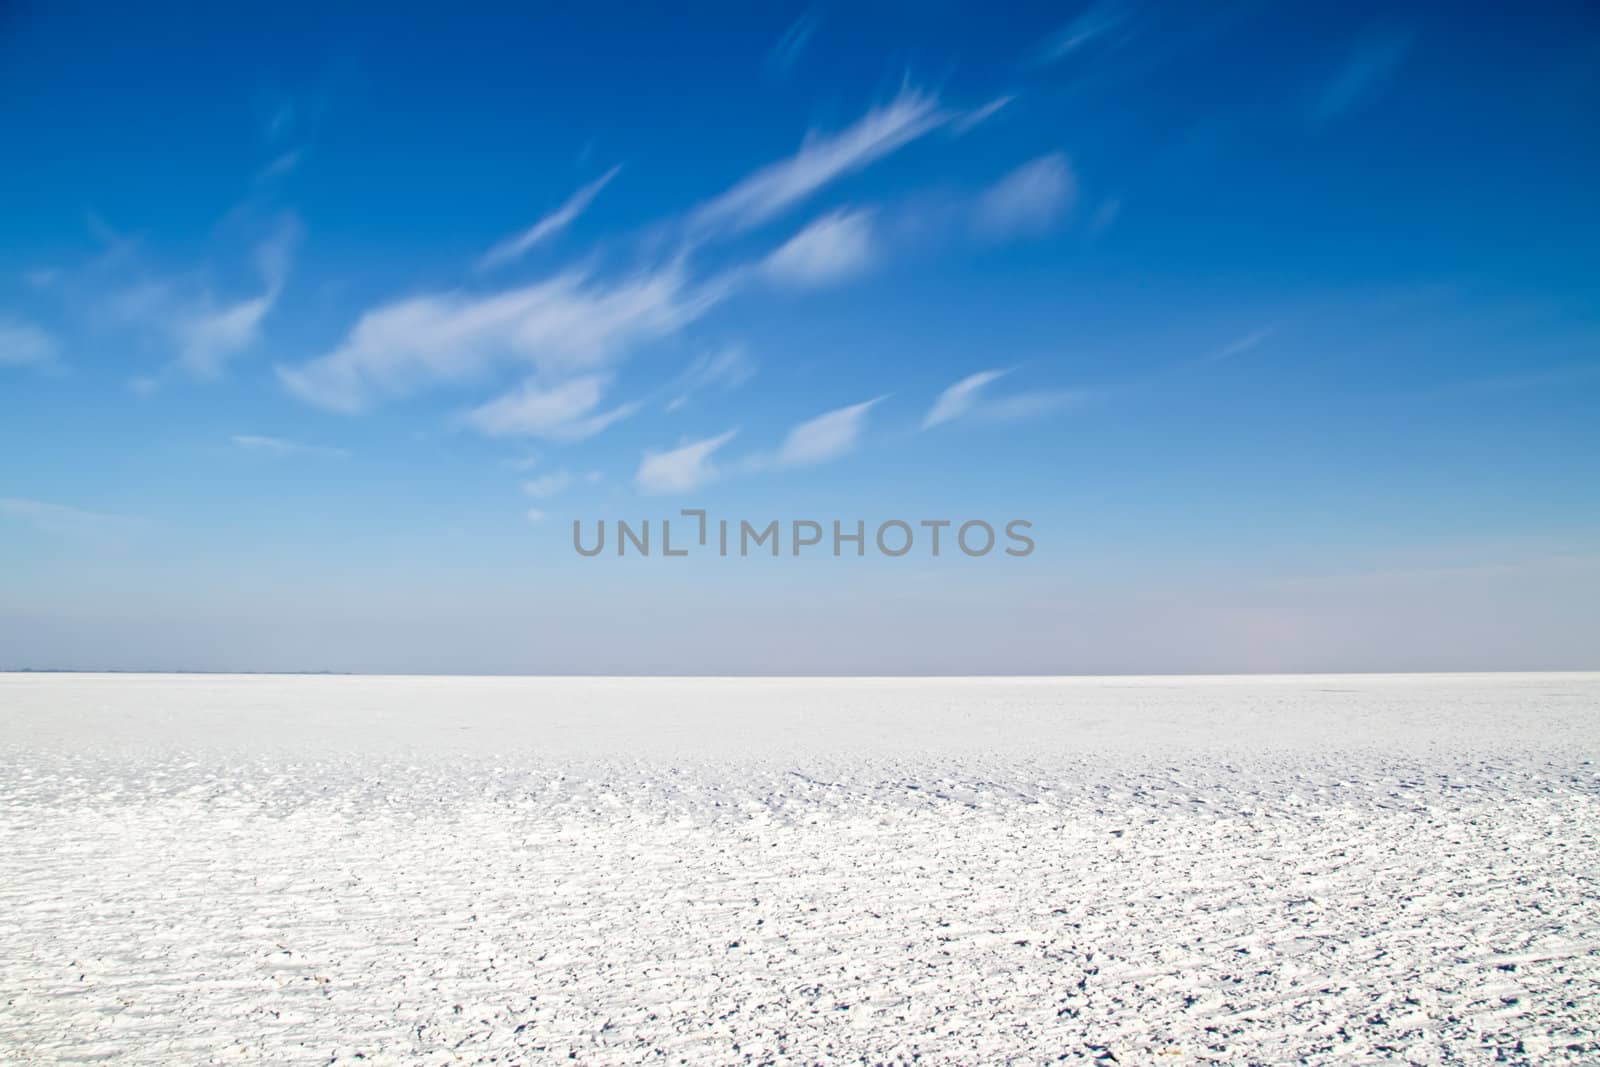 Ice and snow on the IJsselmeer in the Netherlands by devy